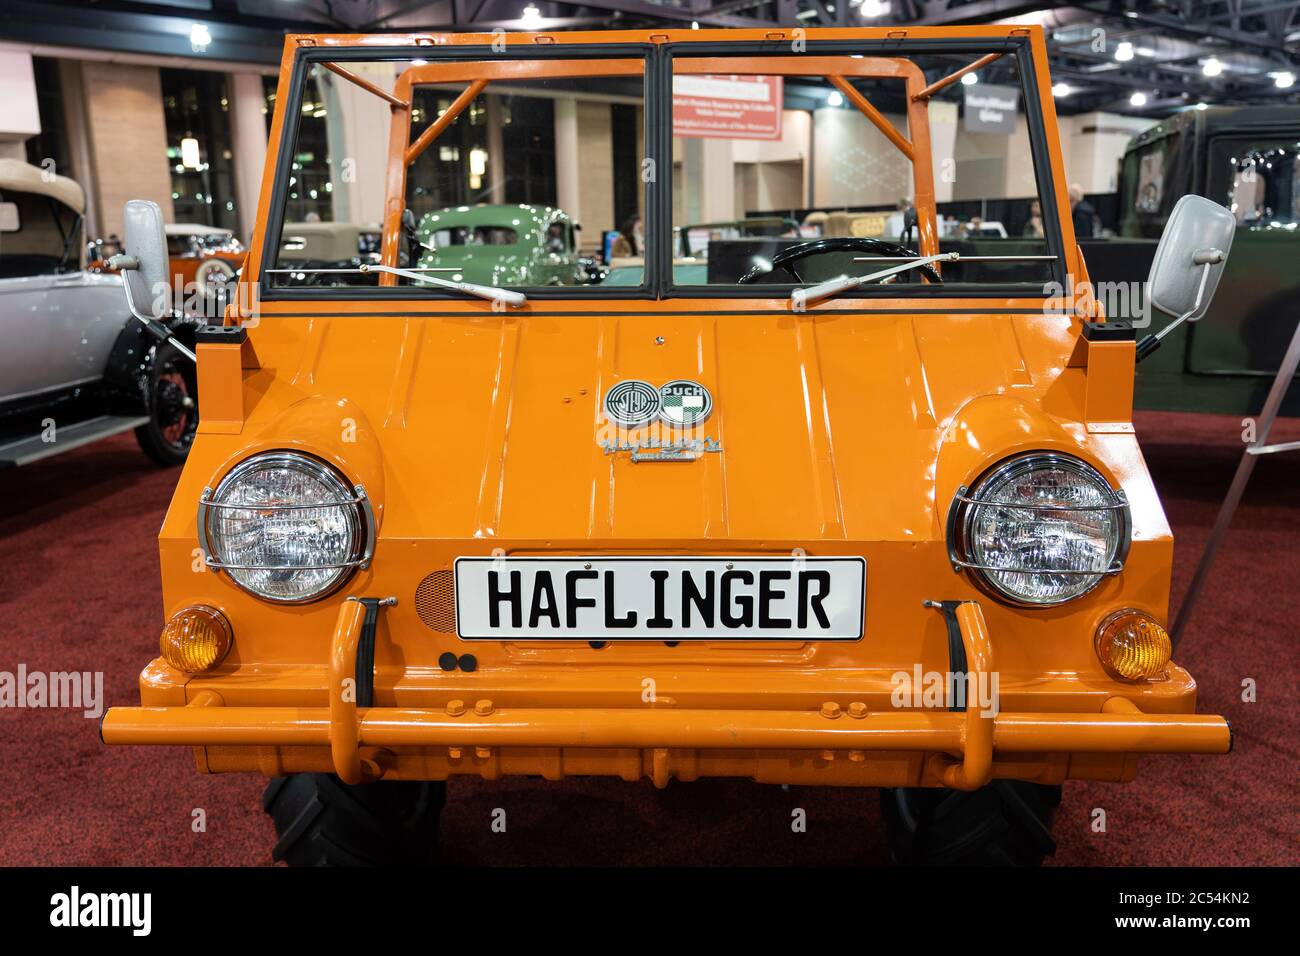 Philadelphia, PA - Feb. 10, 2020: This 1971 Haflinger'Pathfinder' 4 wheel drive vehicle by Steyr Puch is at the Philadelphia Auto Show in the Conventi Stock Photo